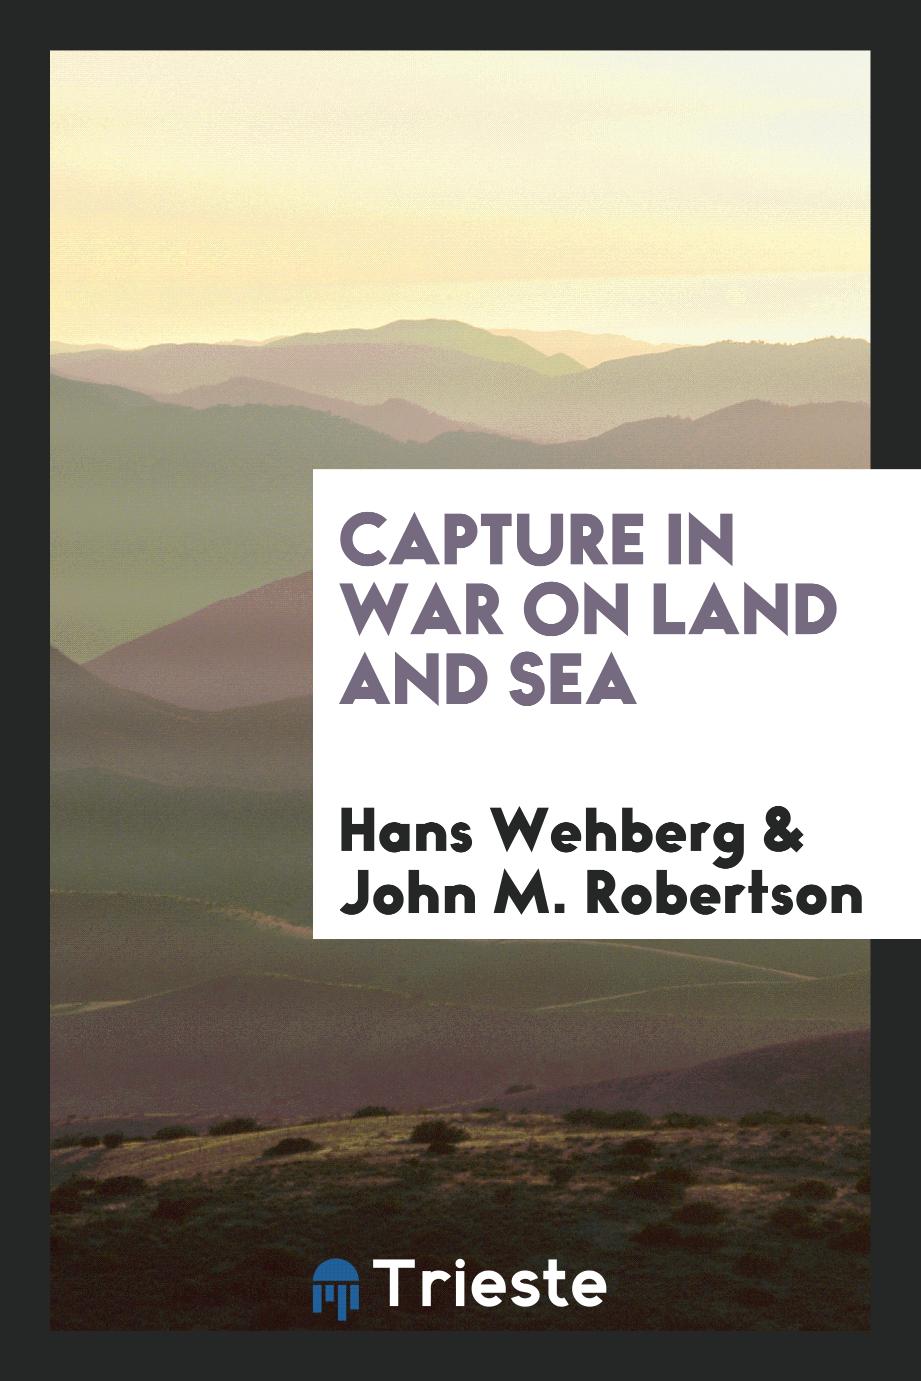 Capture in war on land and sea